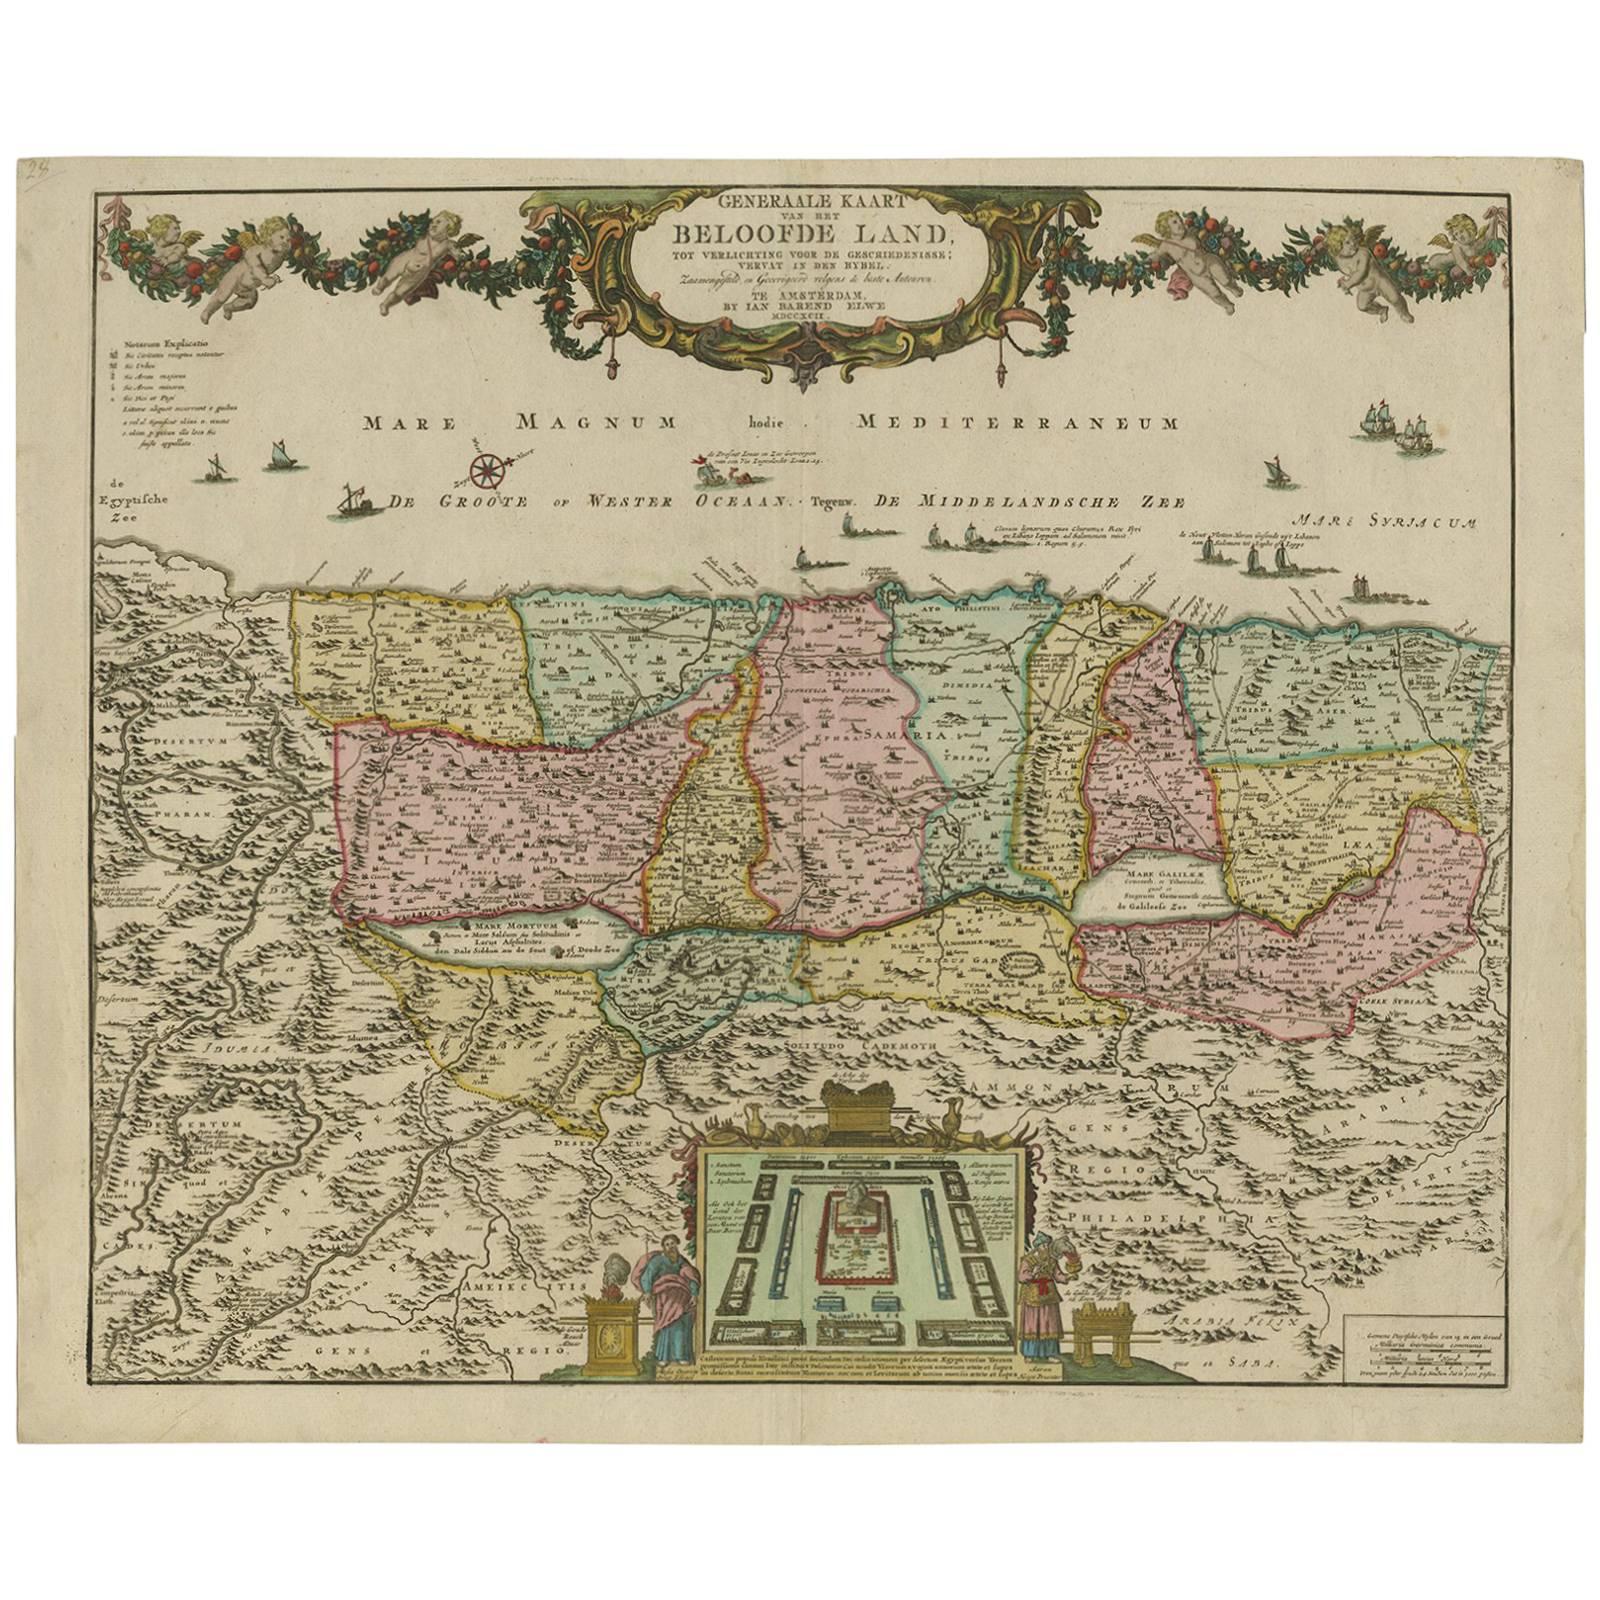 Antique Map of the Holy Land, Israel by J.B. Elwe, 1792